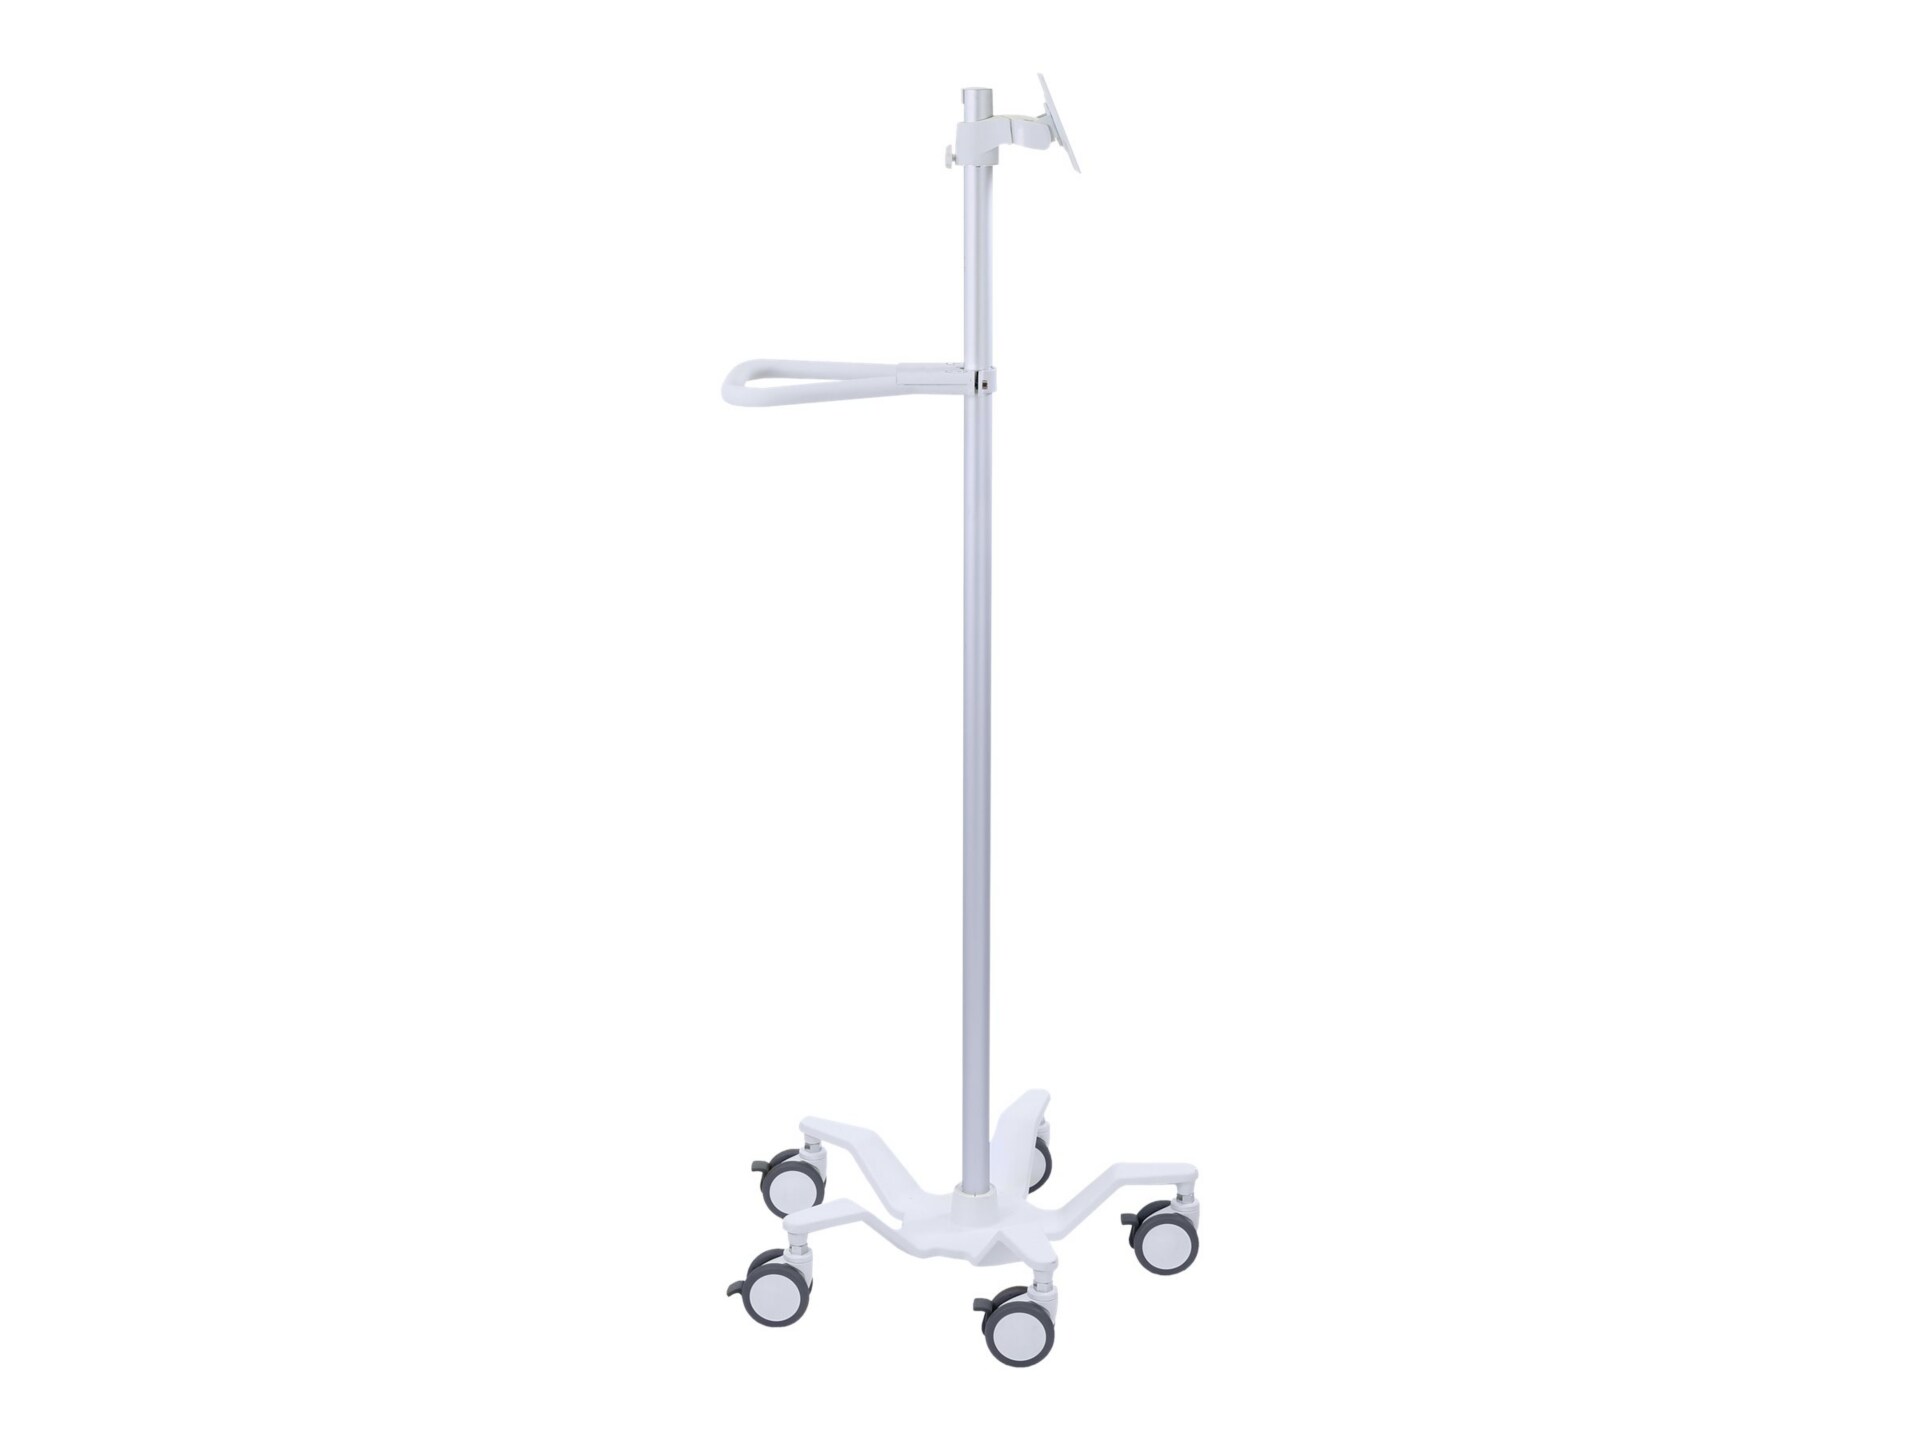 Ergotron StyleView Pole Cart cart - for LCD display / tablet - bright white